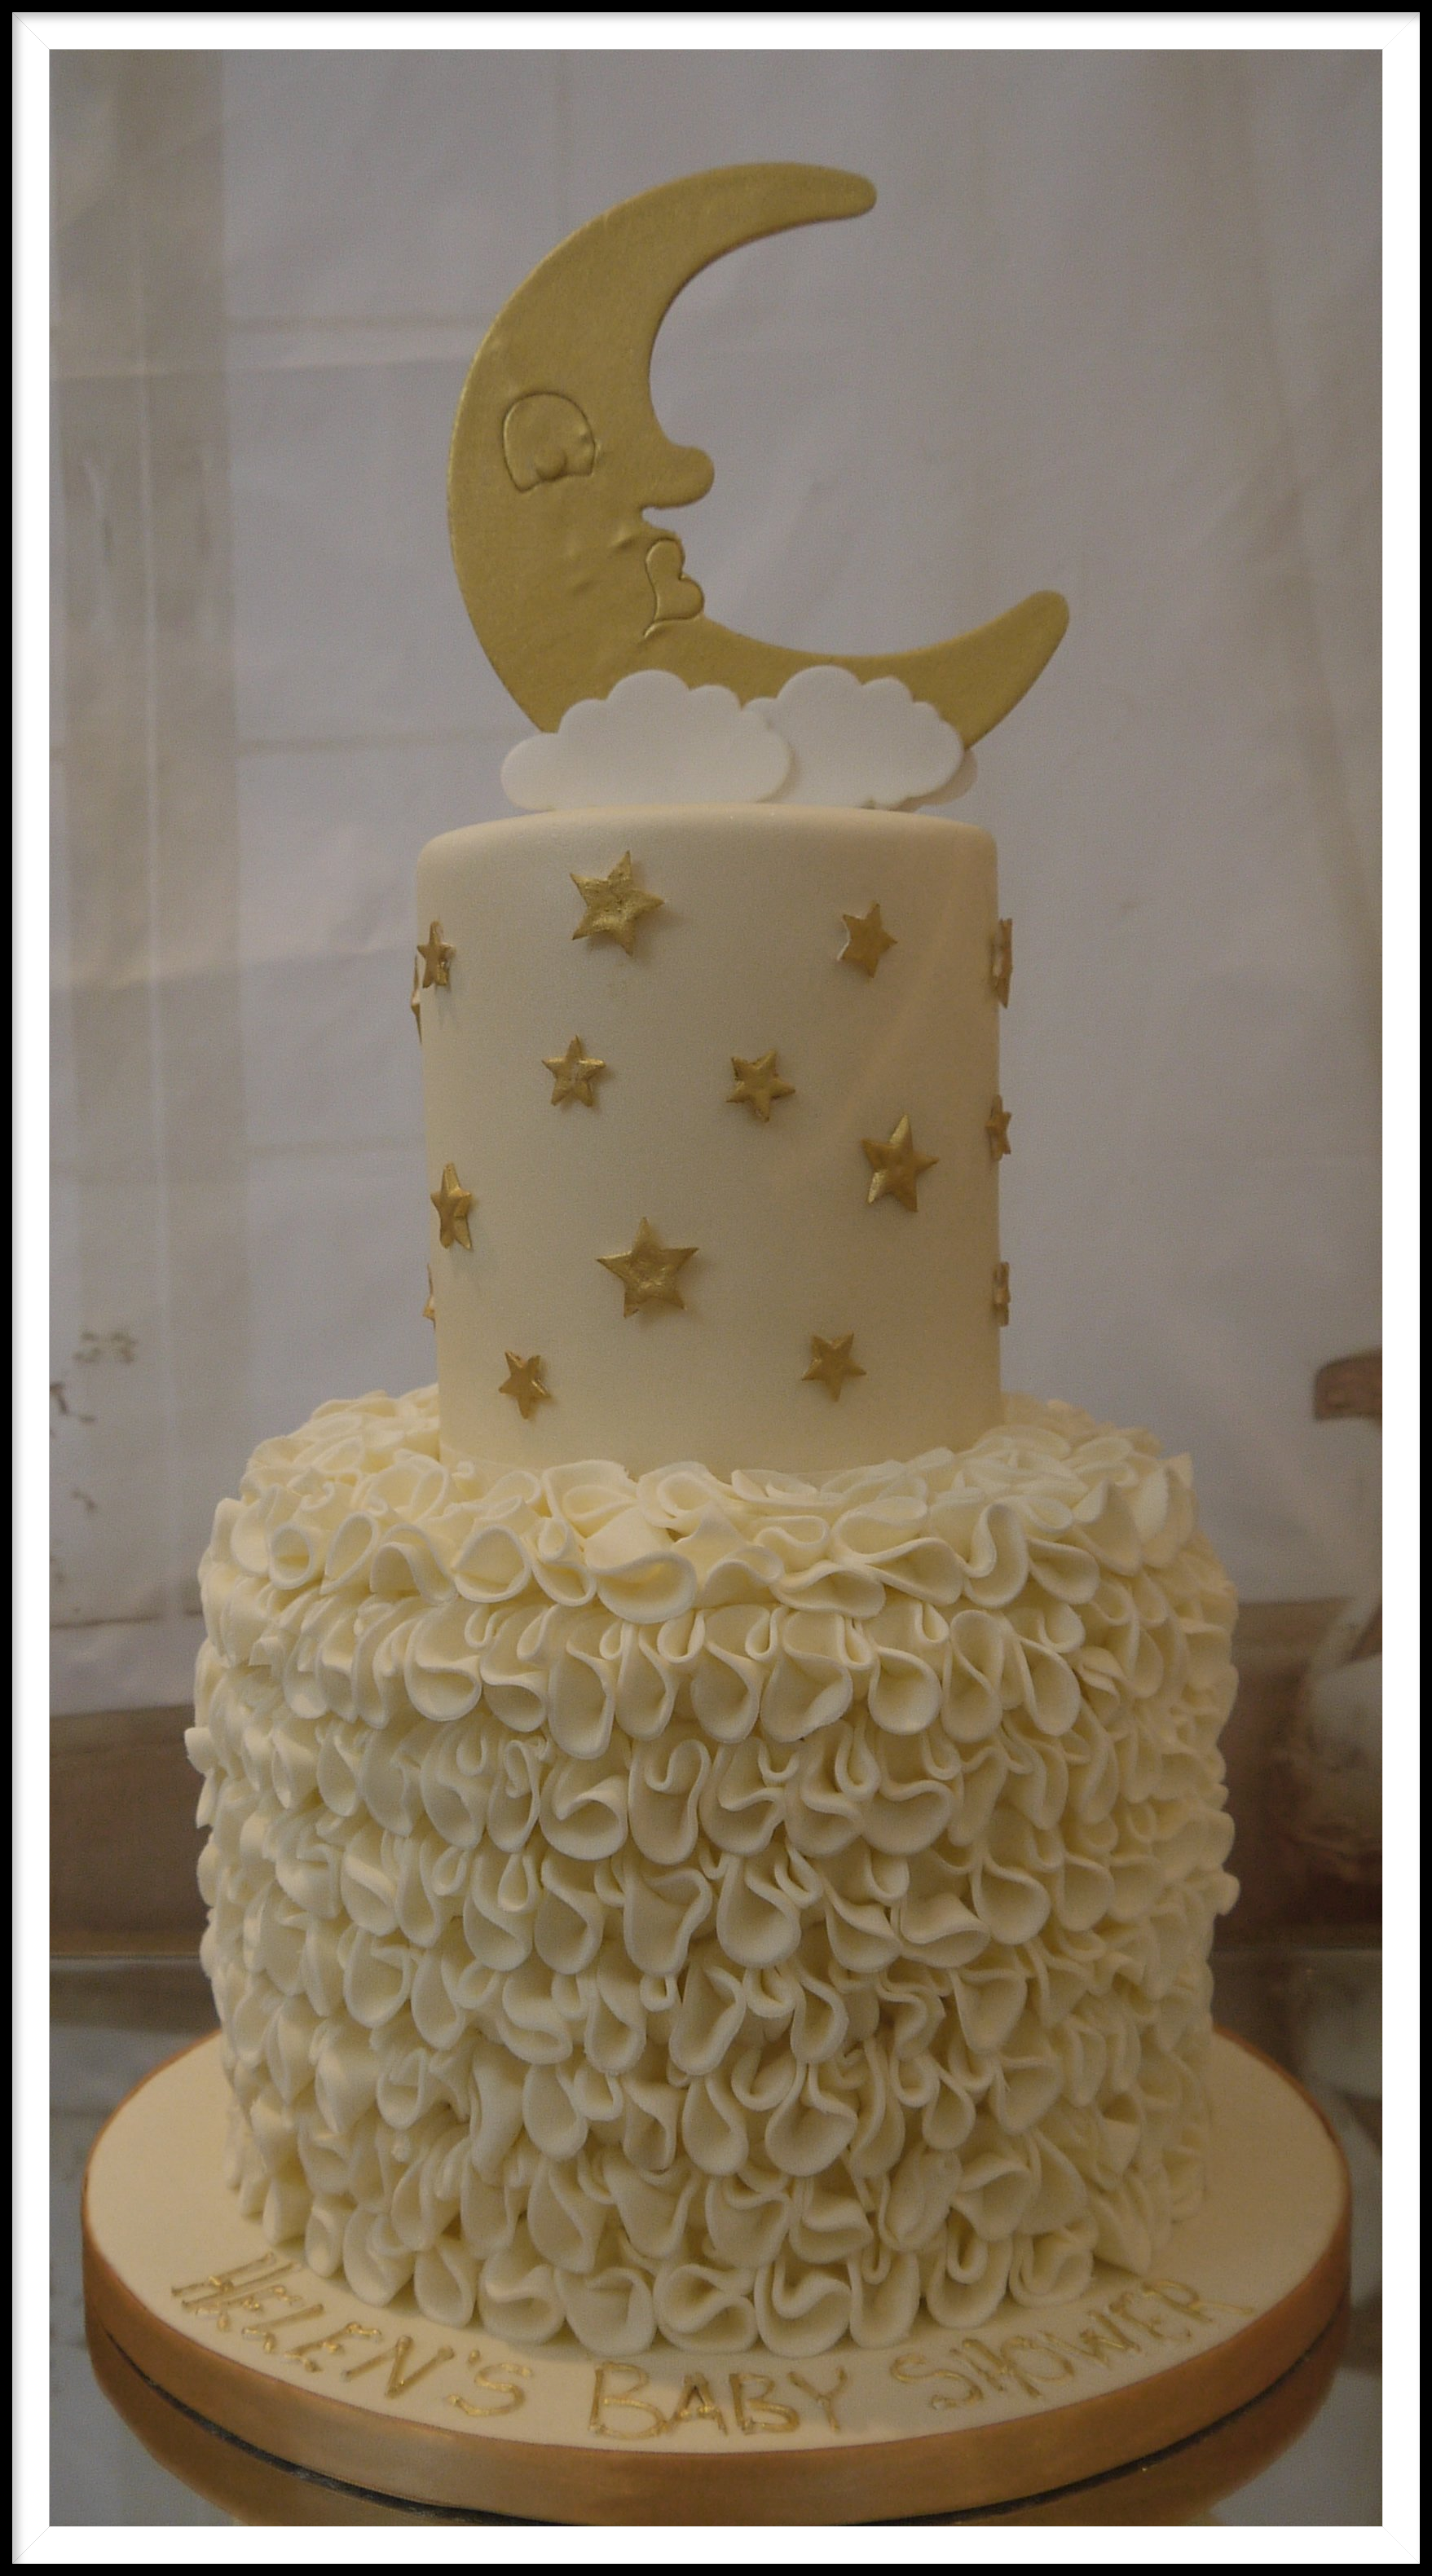 4 tier baby shower  cakewith ruffles, star and moon